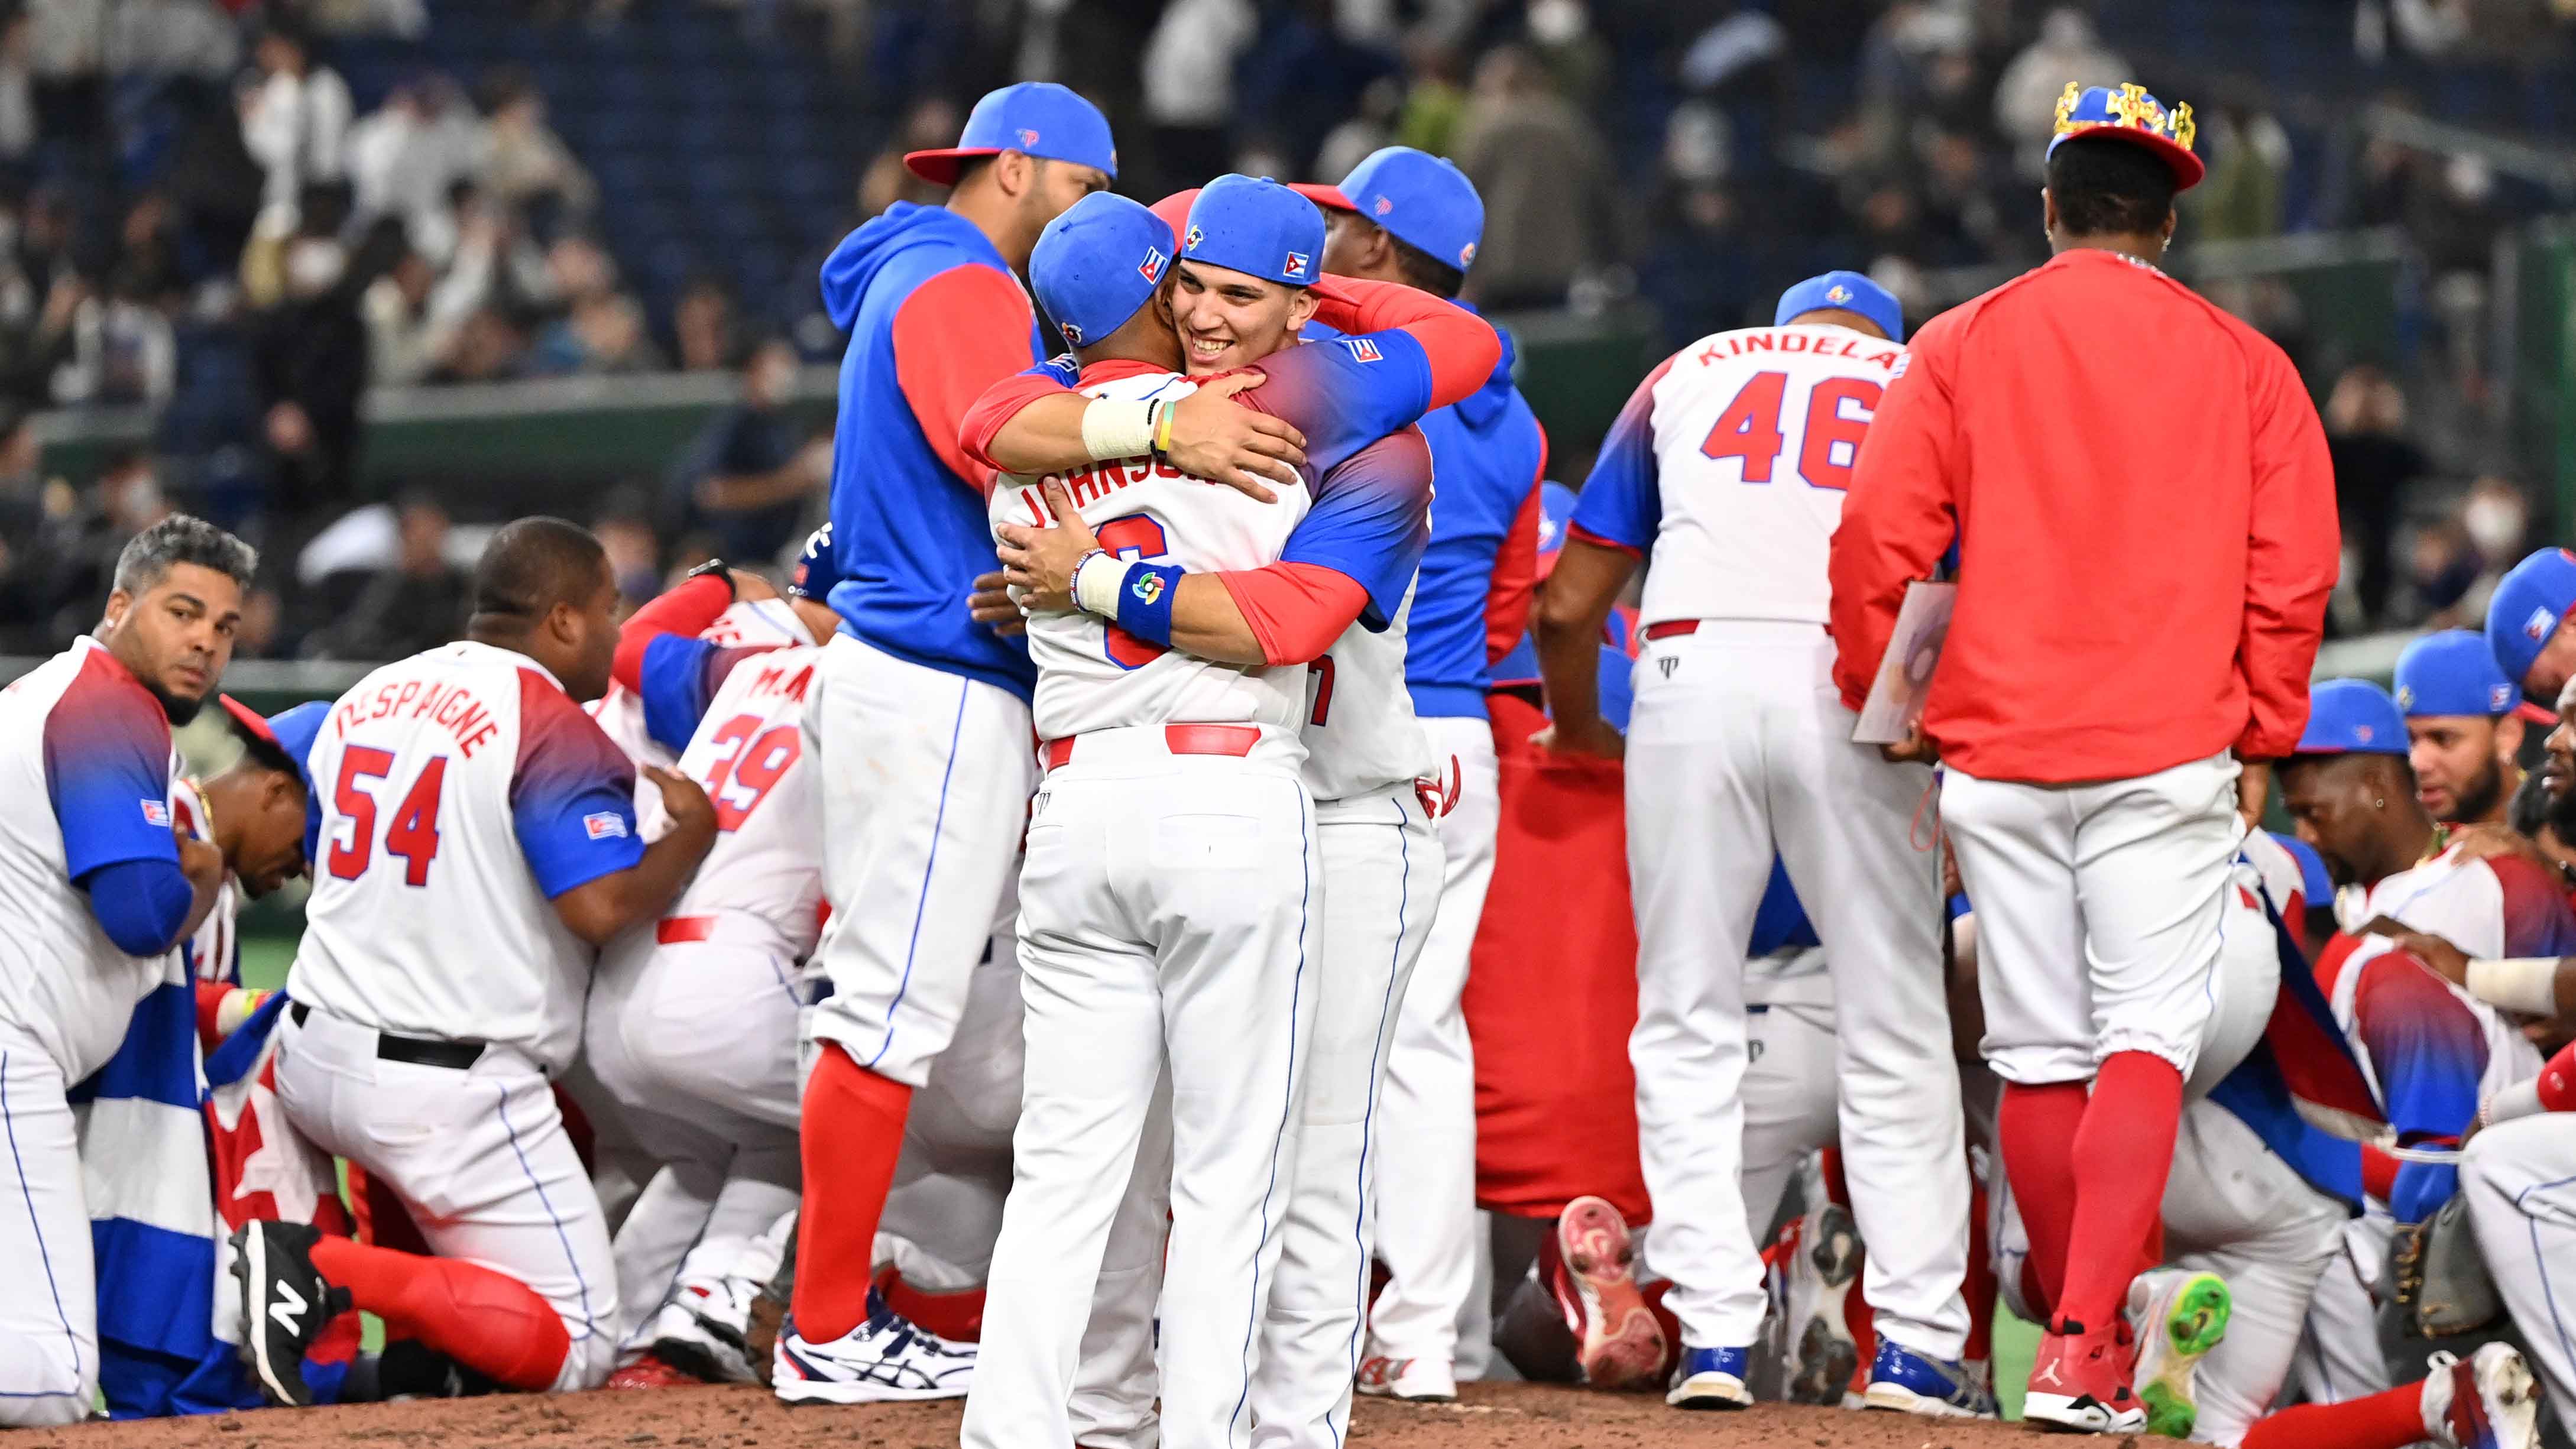 Japan advanced to third WBC championship game, faces U.S. in final